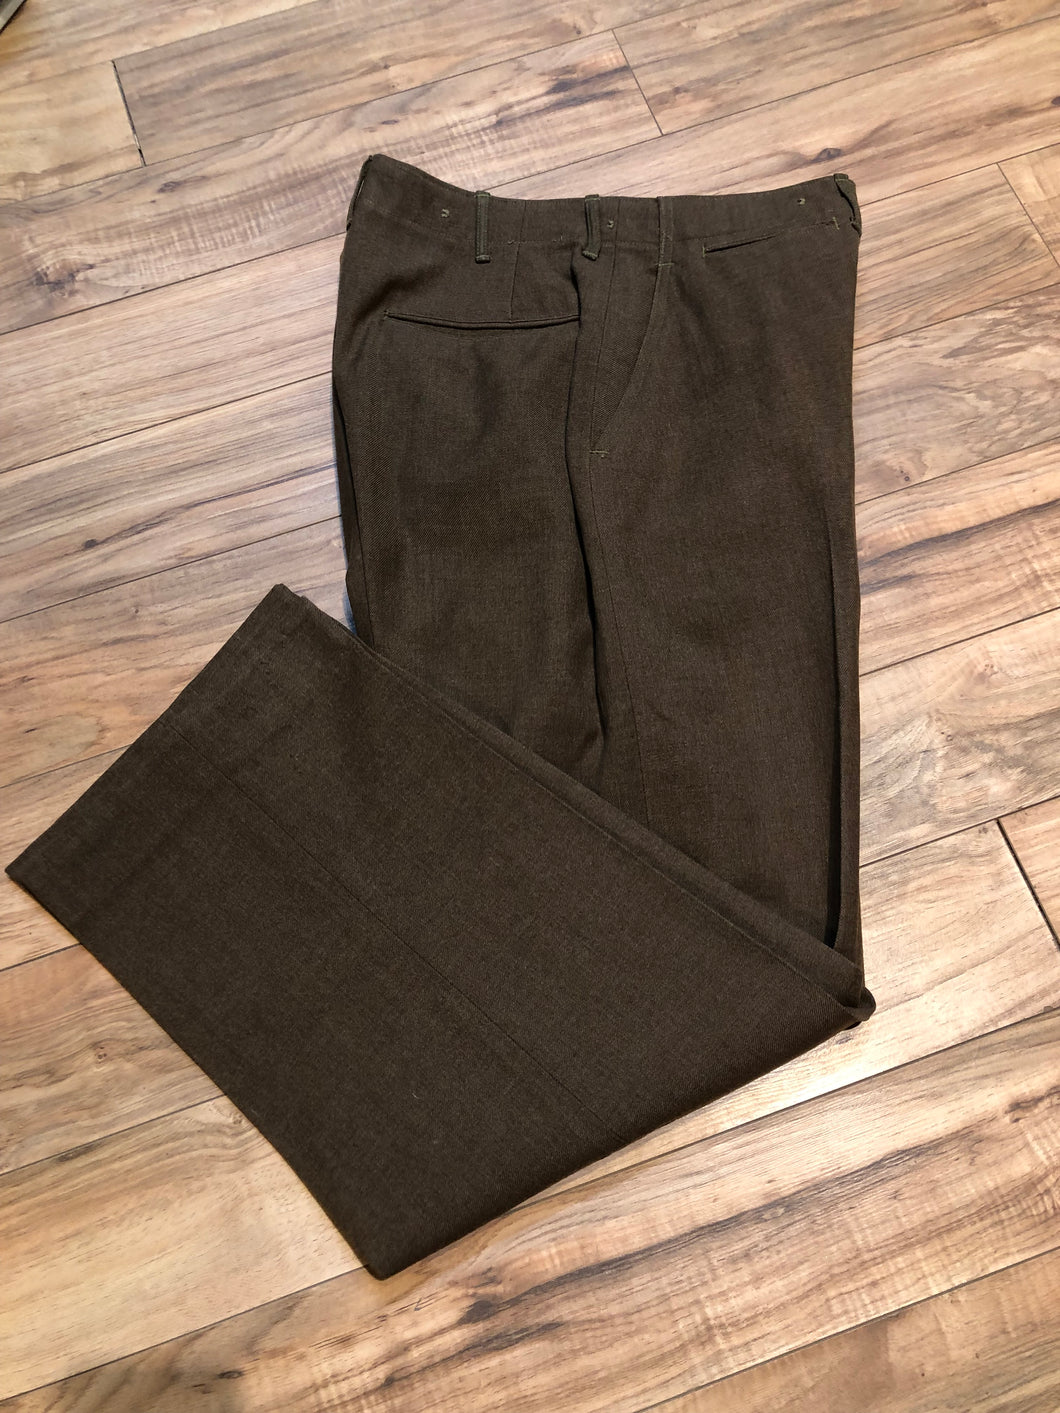 Kingspier Vintage - Vintage 1945 US Army Issue Wool Field Trousers with button fly, straight leg and front and back pockets.

Made in USA.